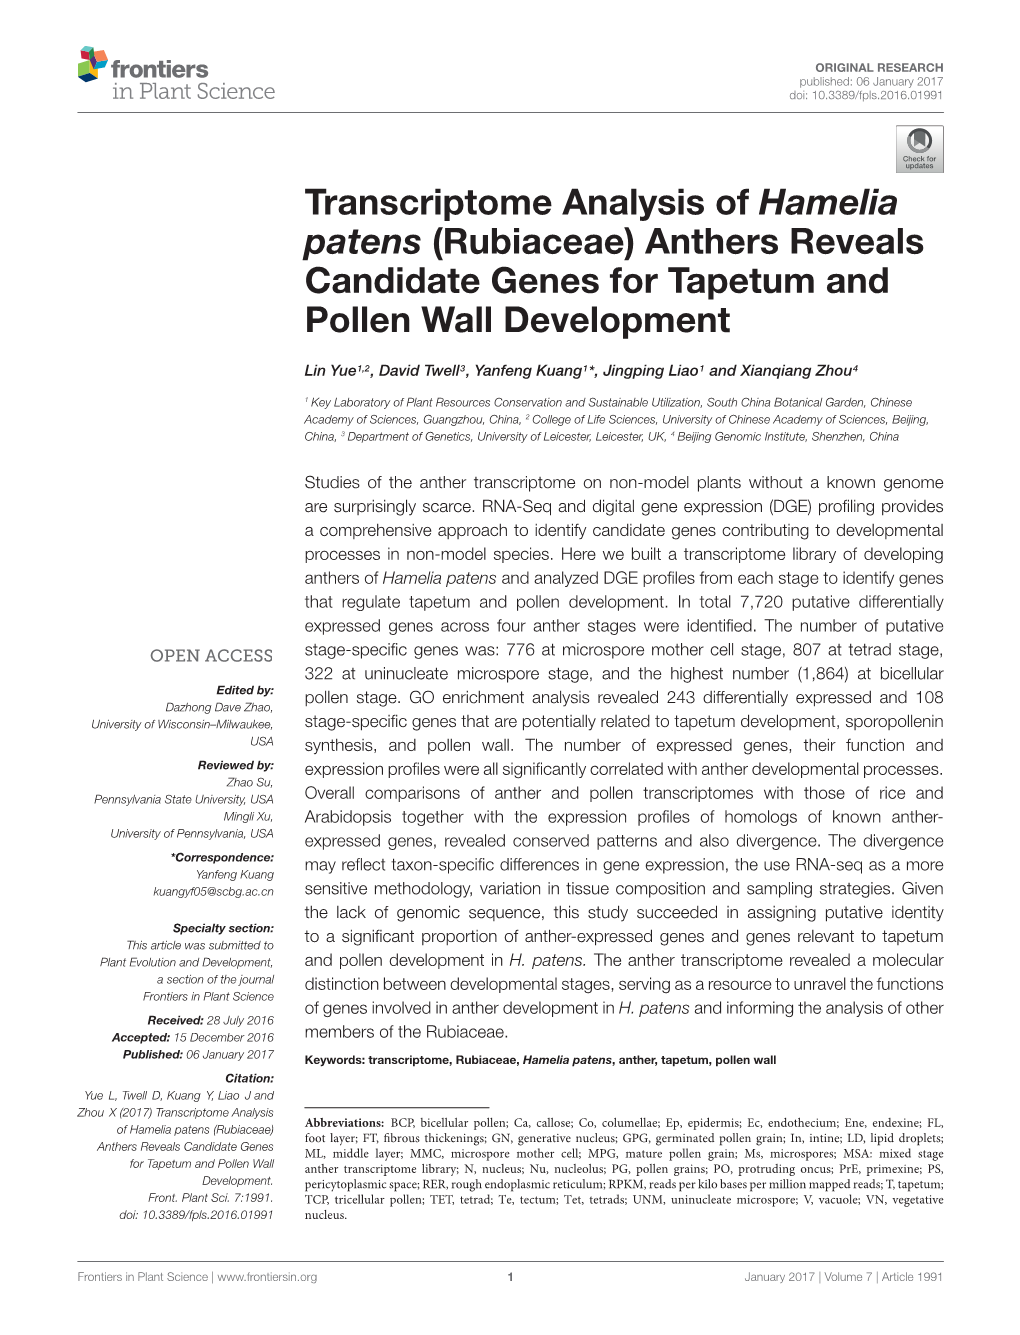 Transcriptome Analysis of Hamelia Patens (Rubiaceae) Anthers Reveals Candidate Genes for Tapetum and Pollen Wall Development